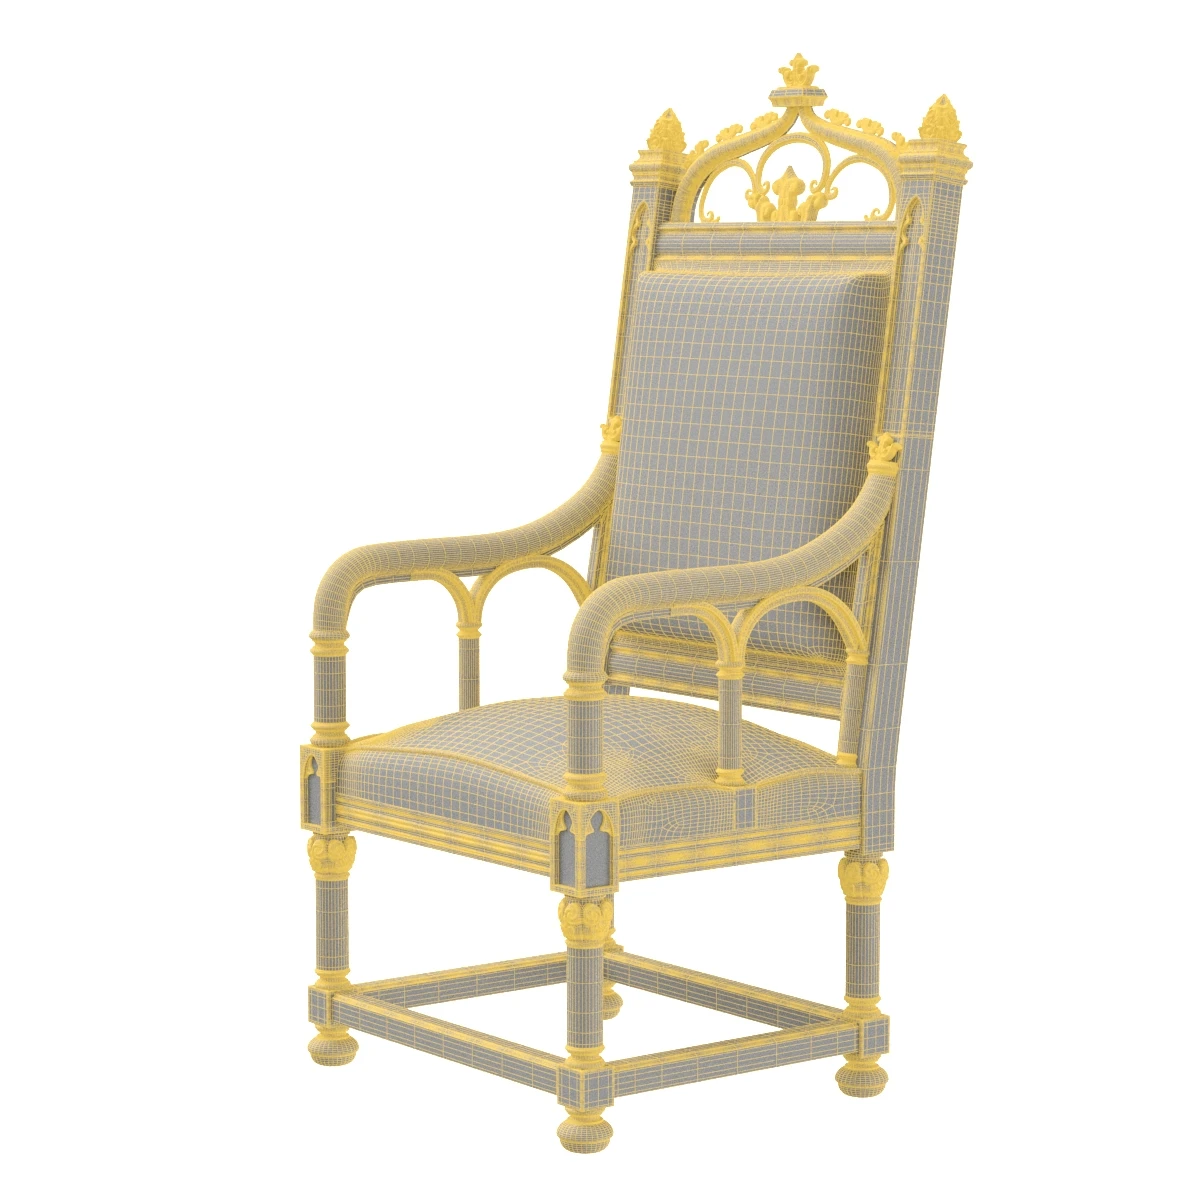 Gothic Style Armchairs France 19th Century 3D Model_07